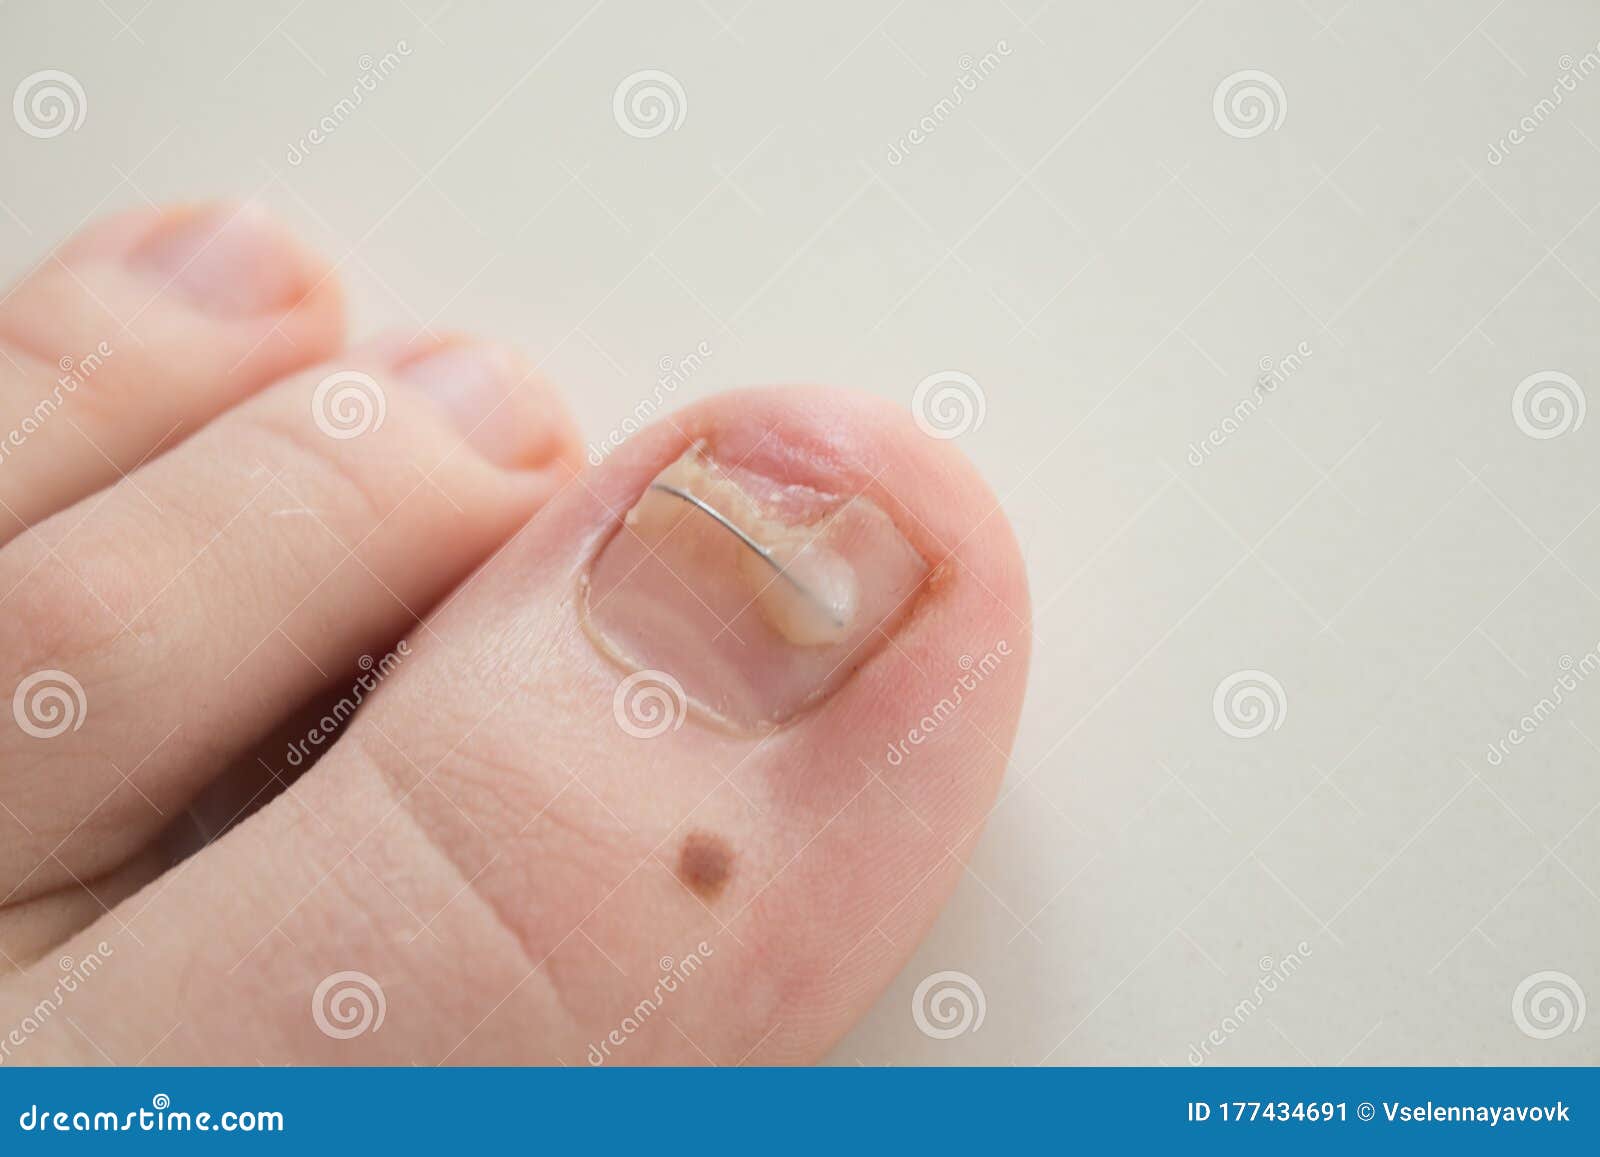 Ingrown Toenail Treatment. the Results of Drugs for the Treatment of Fungal  Infections and Ingrown Nails. Bracket Stock Image - Image of bracket,  beauty: 177434691